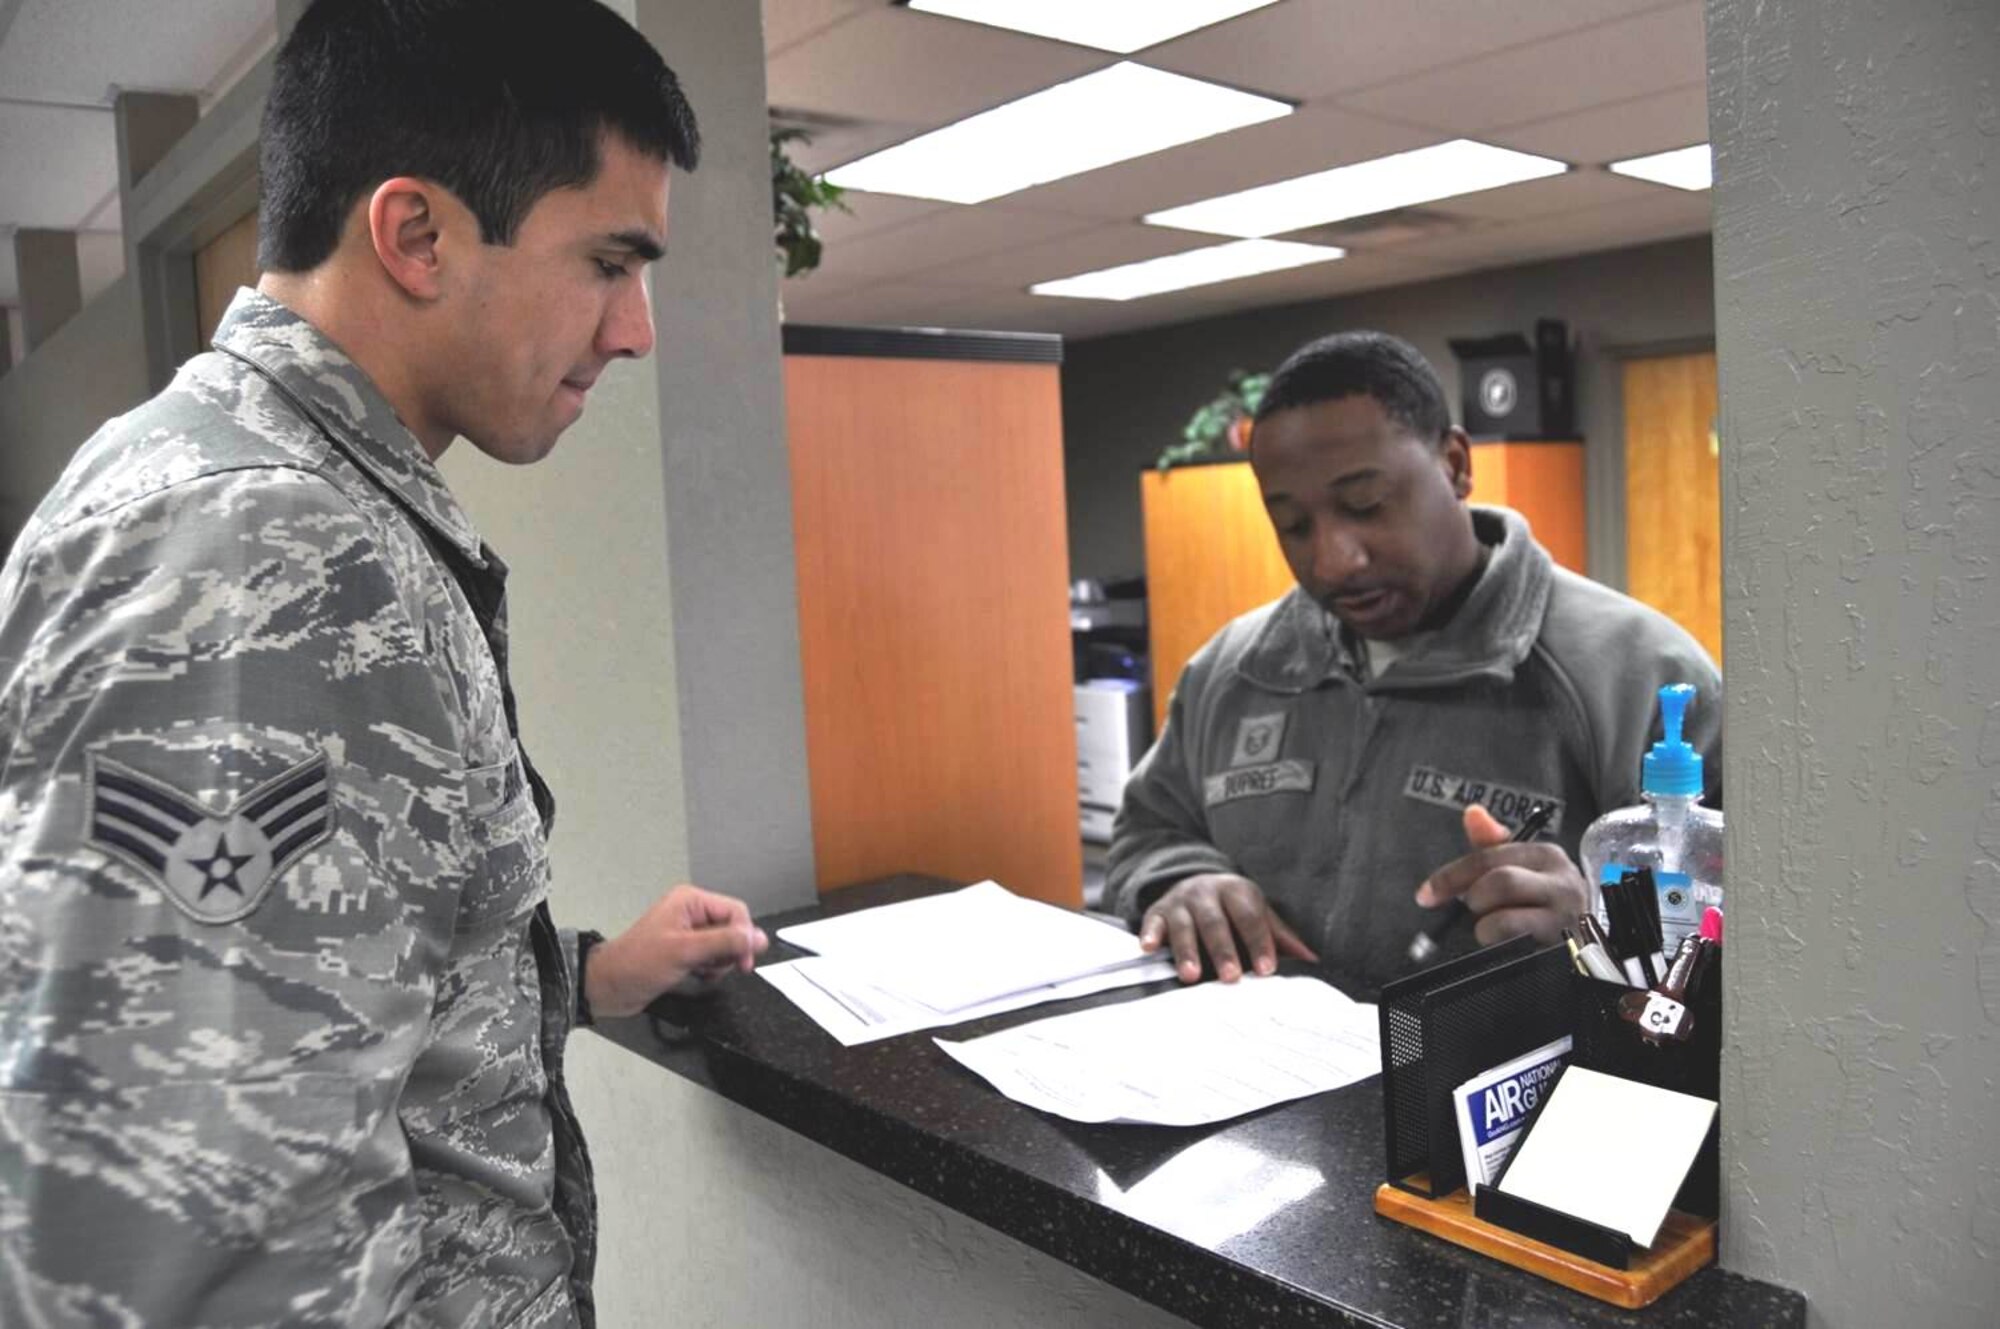 Master Sgt. Ken DuPree (right) helps a customer at the new customer service area inside the Wing headquarters building at the Nevada Air National Guard base in Reno.  USAF photo by Tech. Sgt. Rebecca Palmer RELEASED.